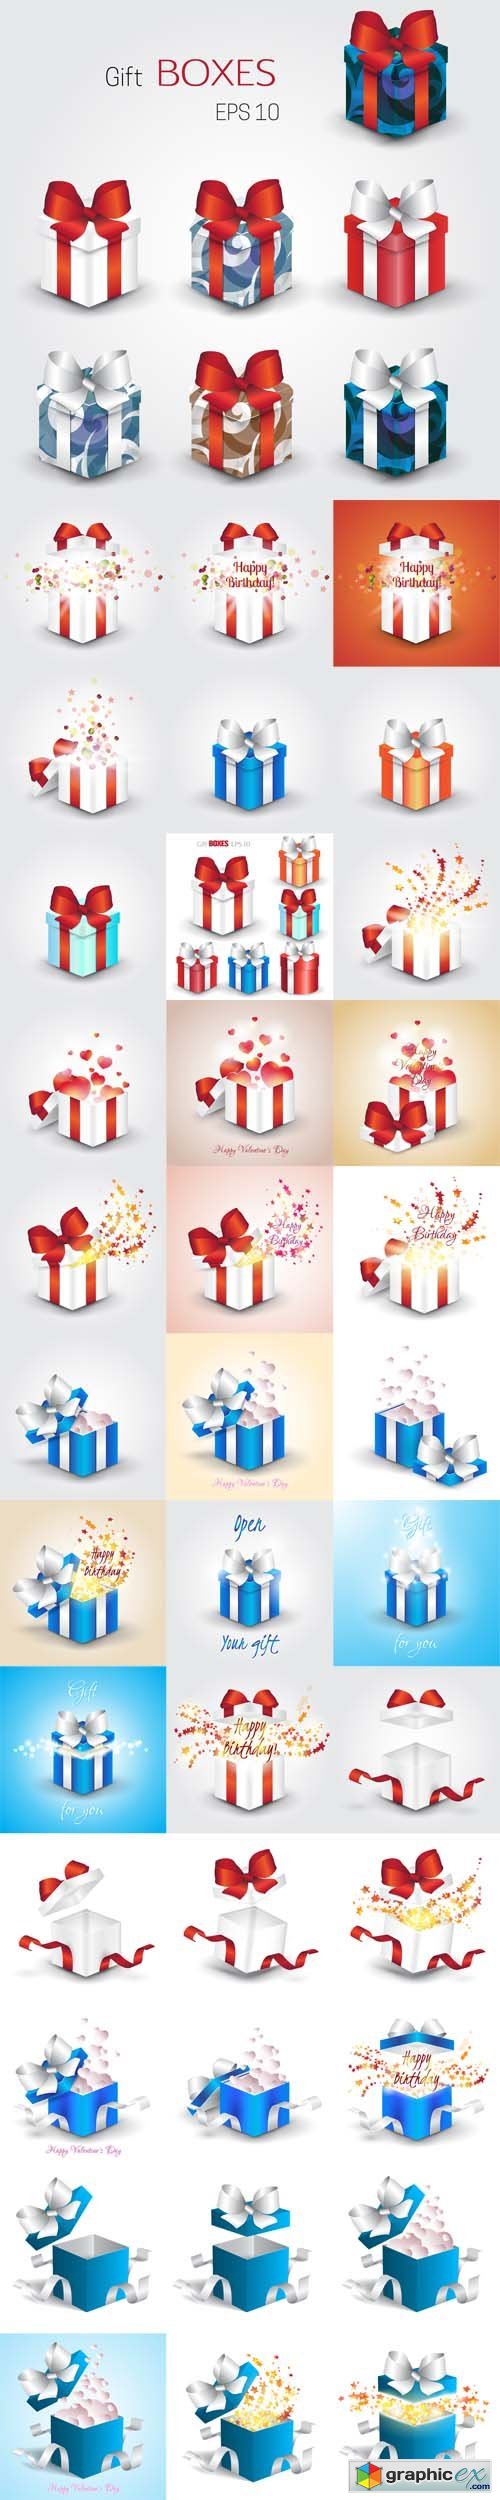 Gift Boxes with a Bow